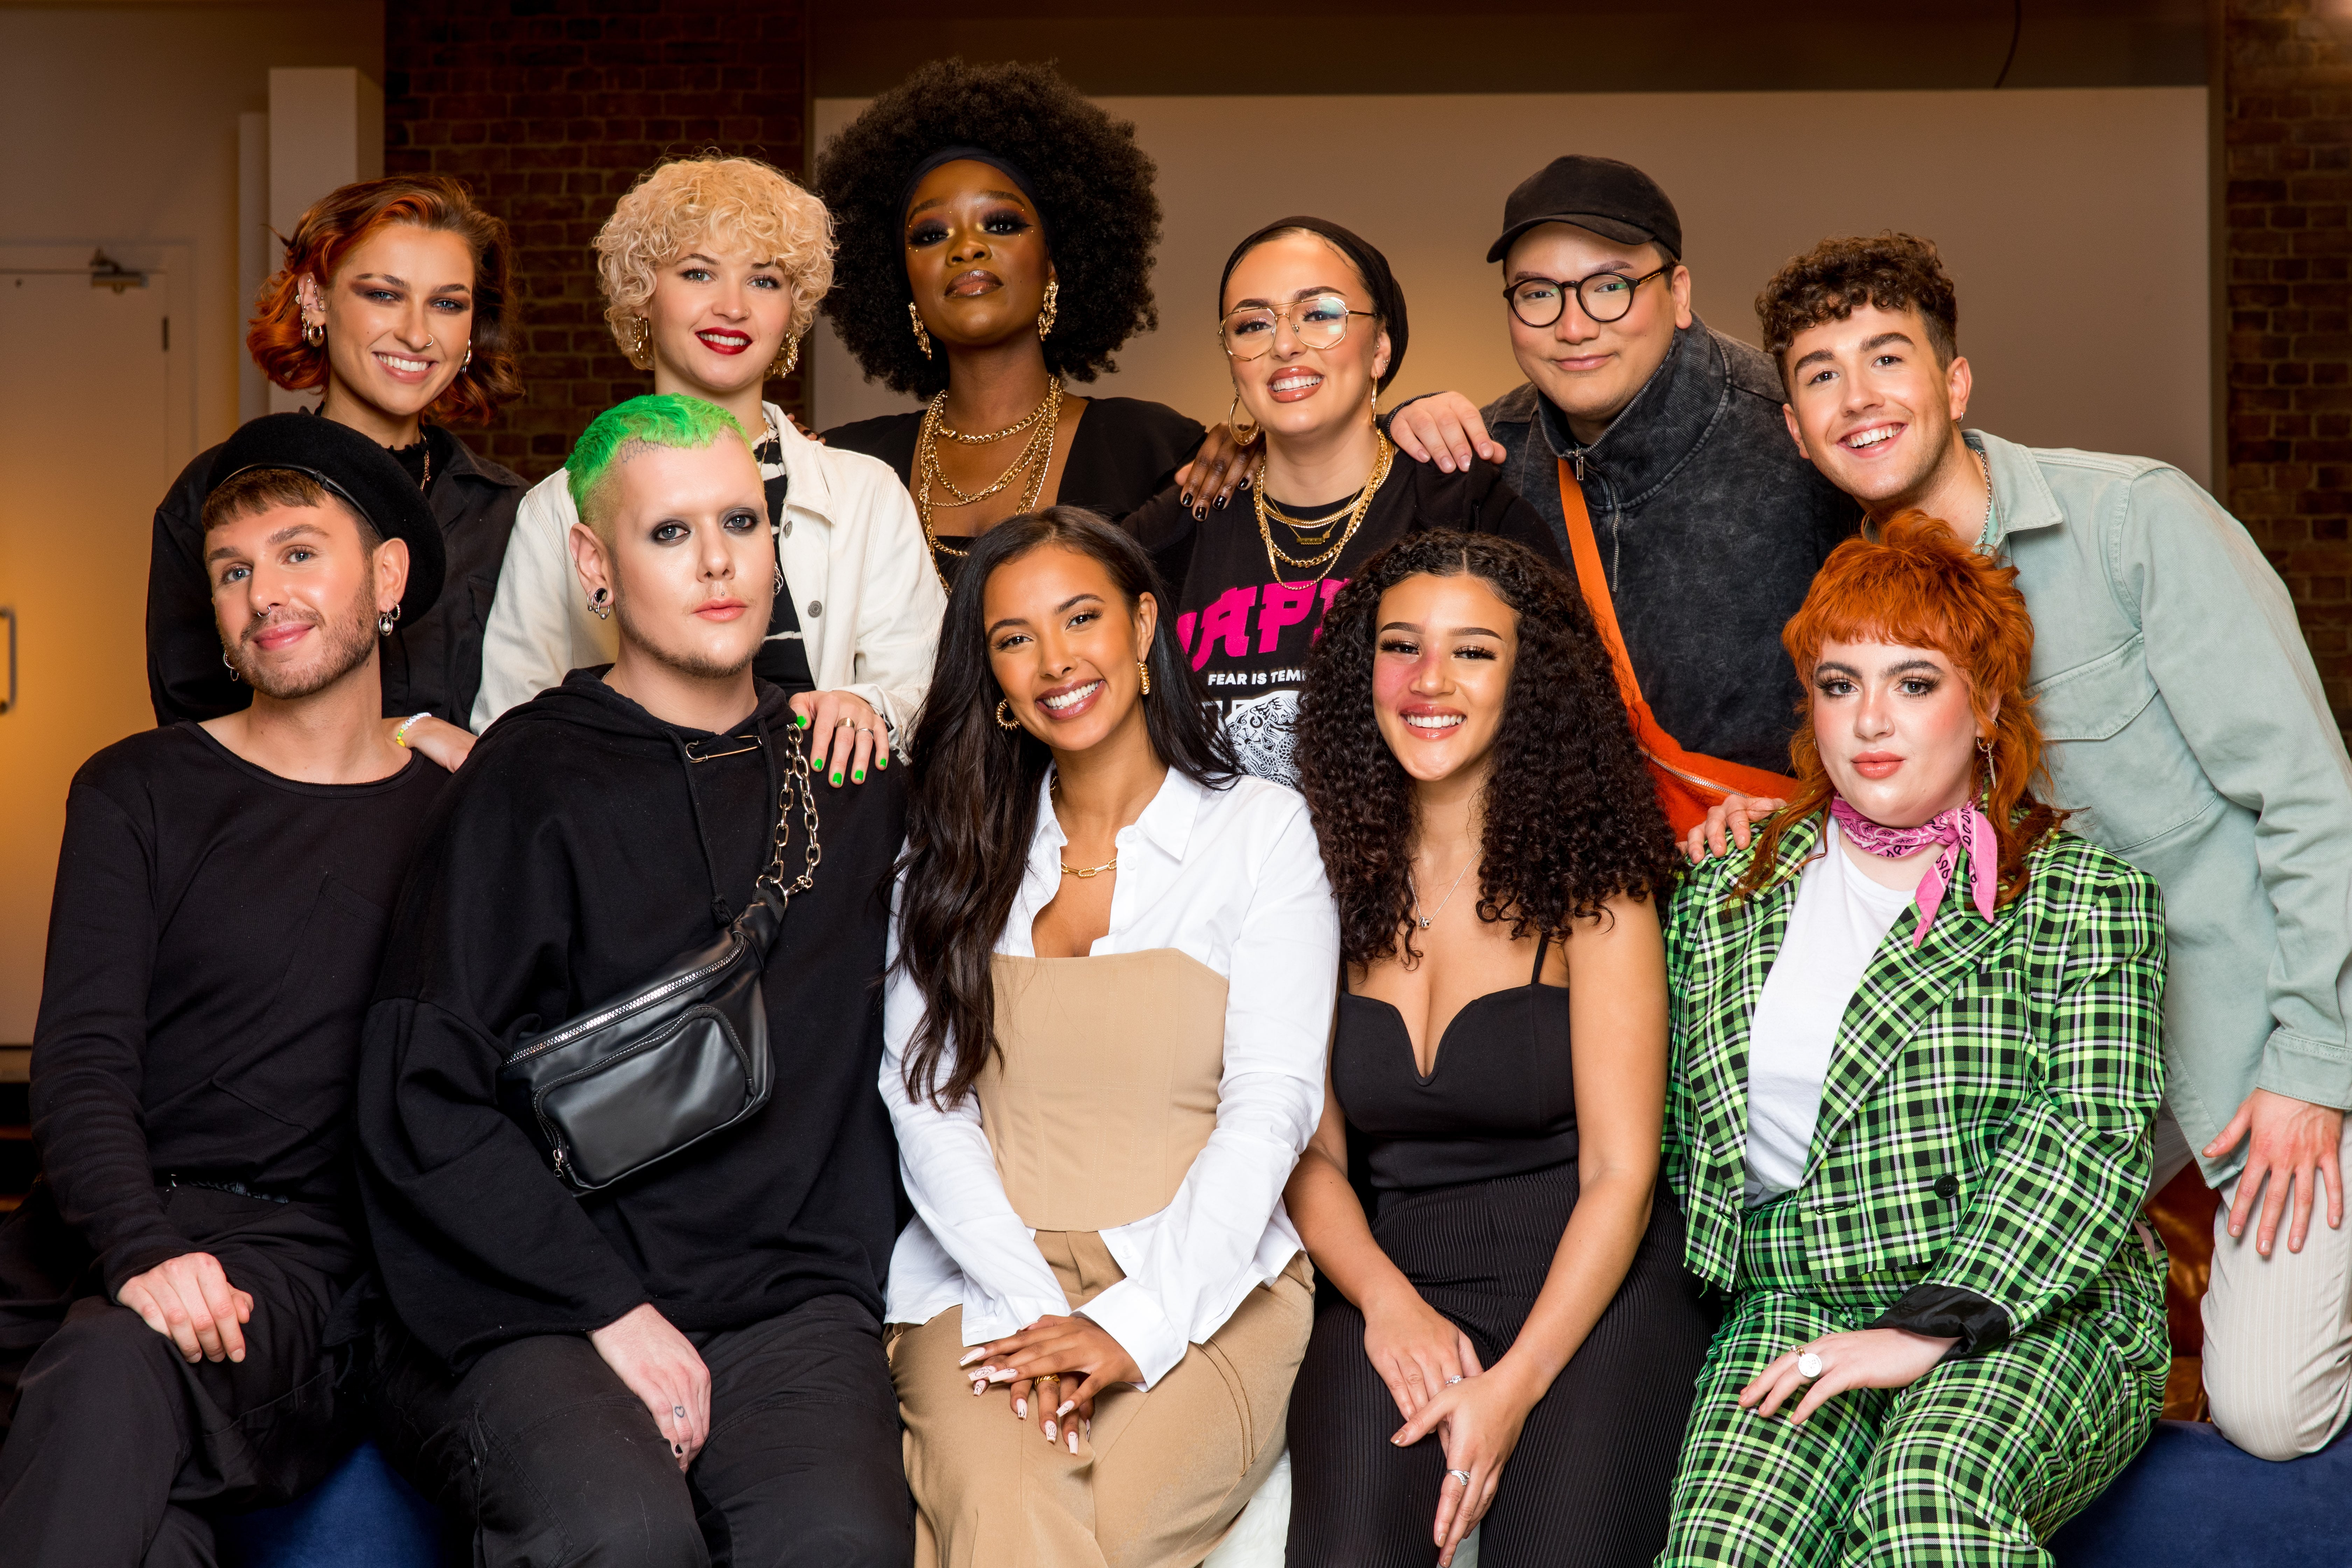 Who Are the Makeup Artists on Glow Up Season 3?